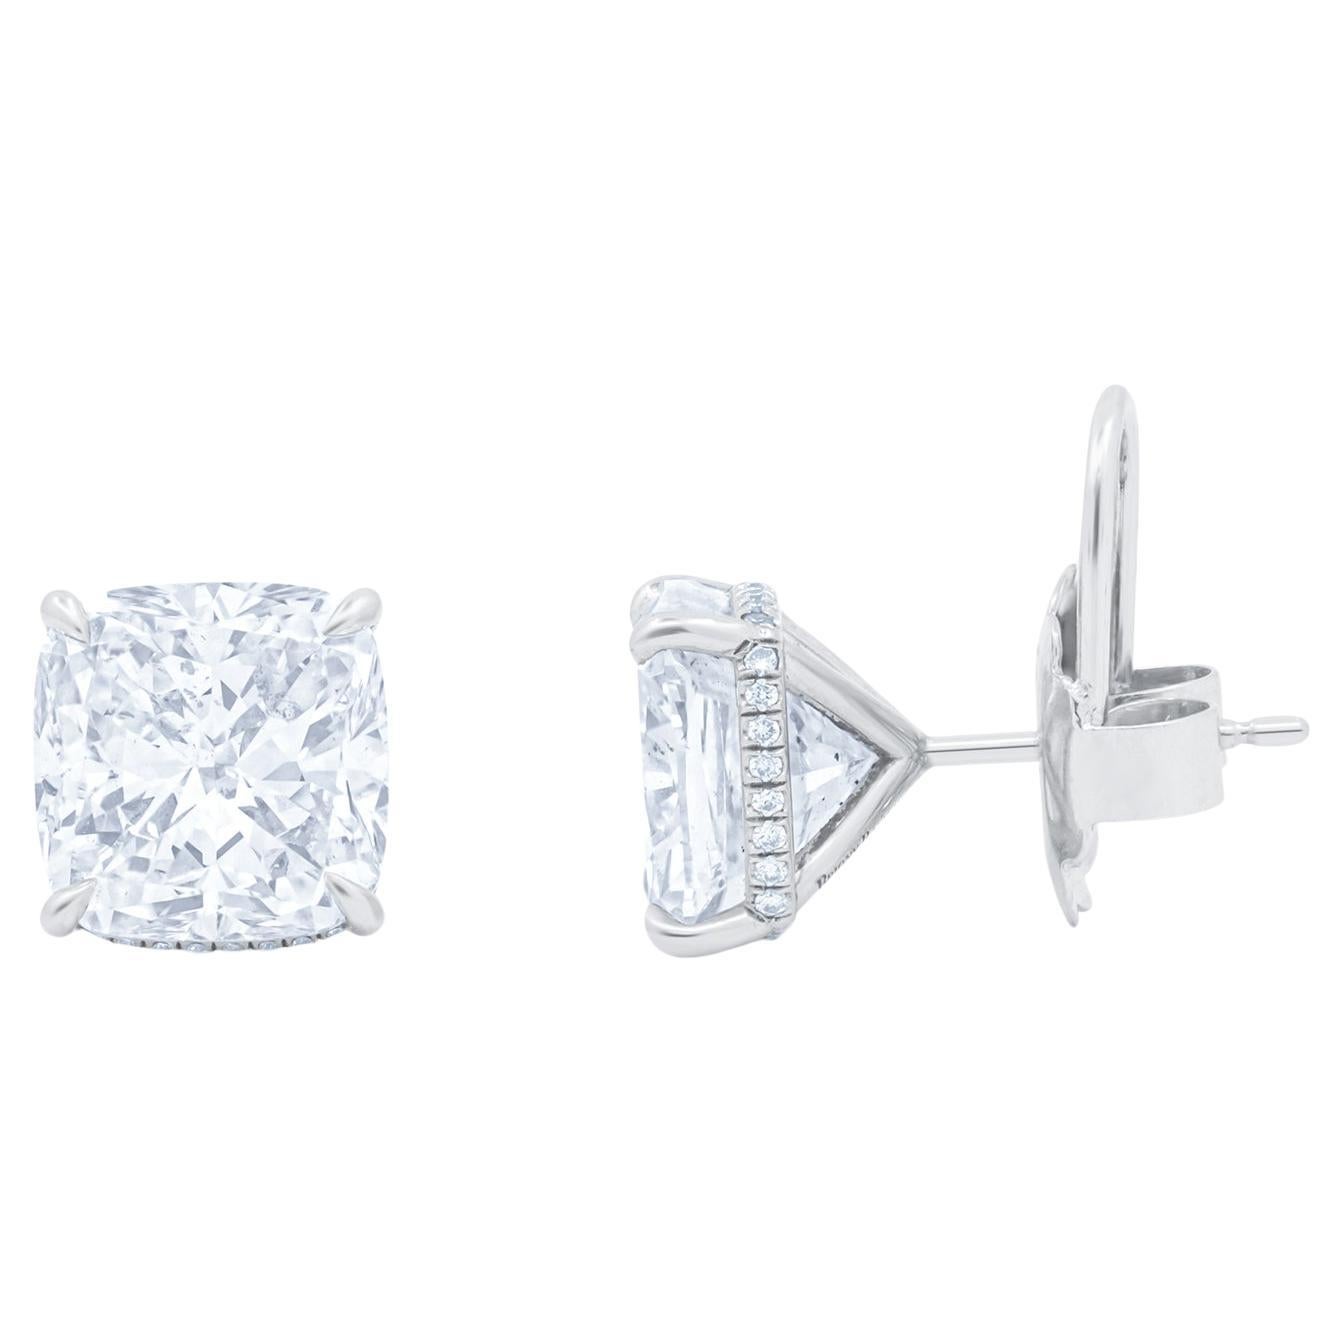 Diana M.Cushions Total 10.53cts H VS2-SI1 GIA certifed Matching Studs  For Sale